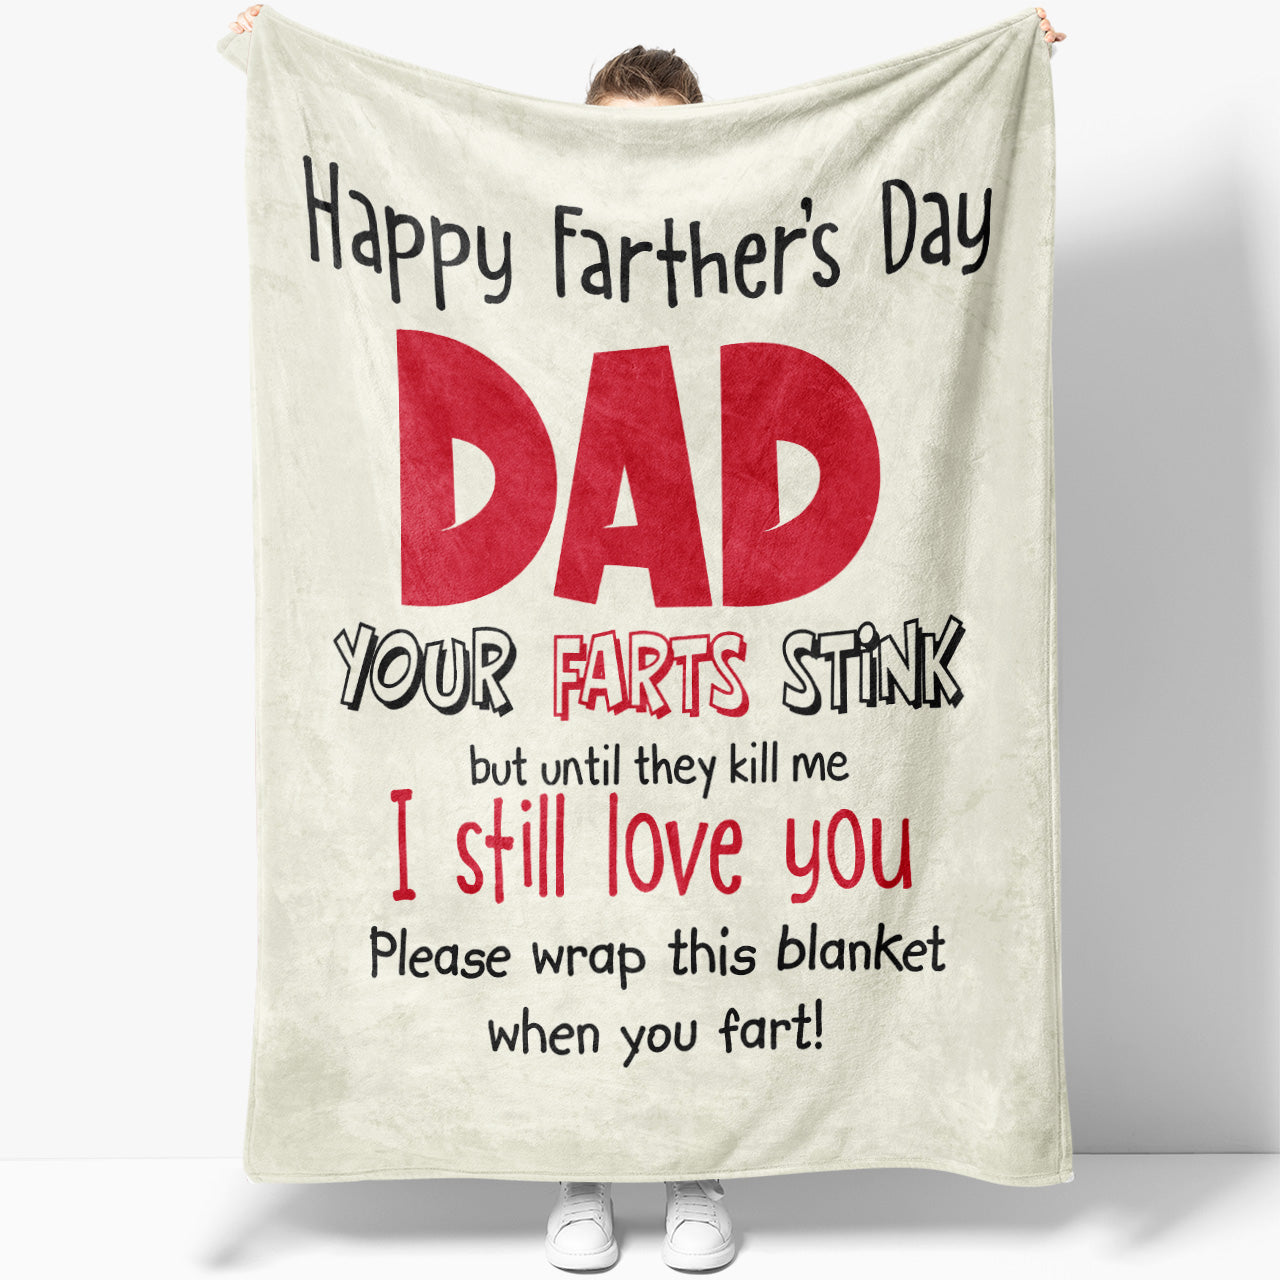 Blanket Gift Ideas For Dad, Funny Fart Fathers Day Blanket Gift